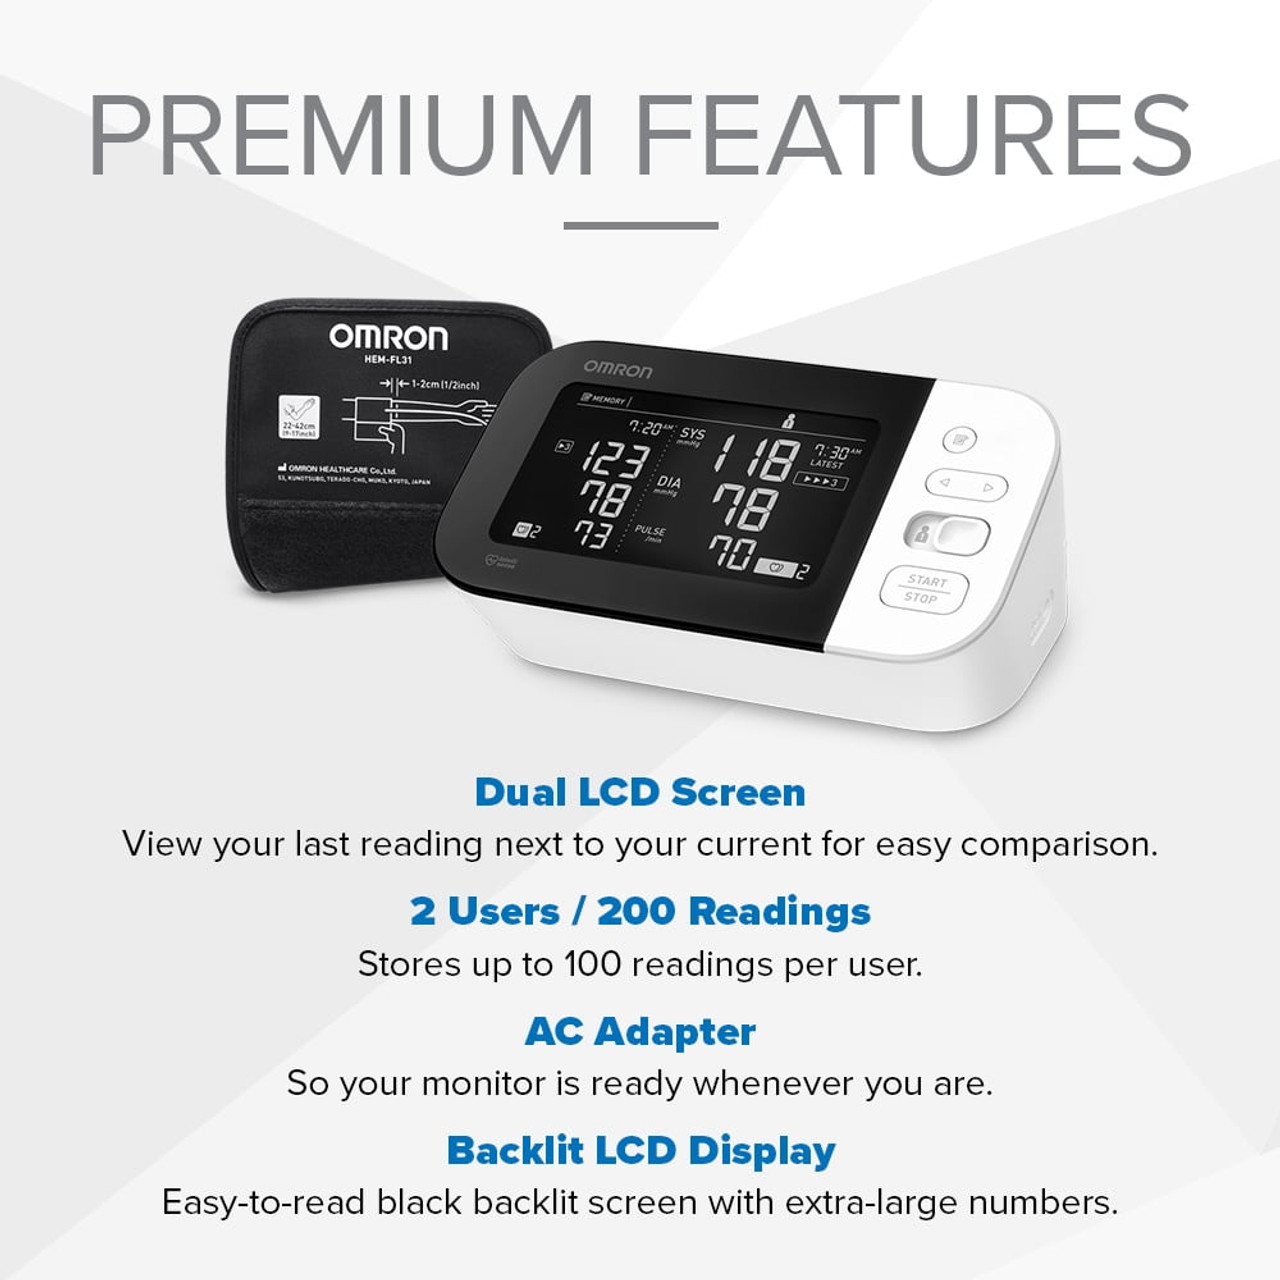 OMRON Platinum Blood Pressure Monitor, Upper Arm Cuff, Digital Bluetooth  Blood Pressure Machine, Stores Up To 200 Readings for Two Users (100 each)